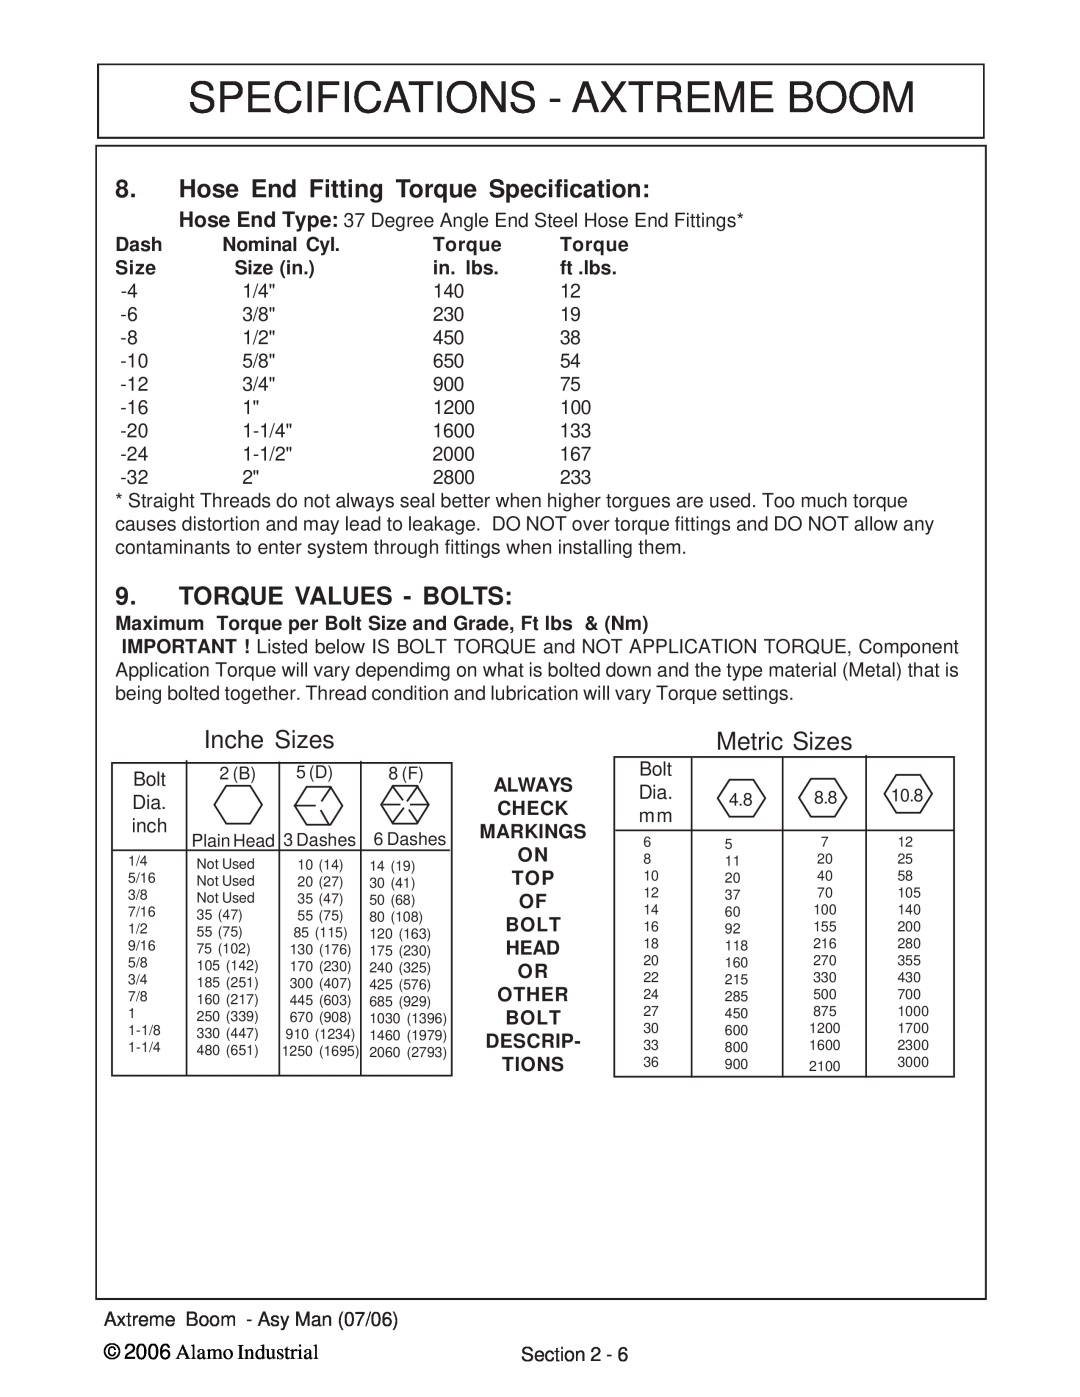 Alamo 02984405 Hose End Fitting Torque Specification, Torque Values - Bolts, Inche Sizes, Metric Sizes, Alamo Industrial 